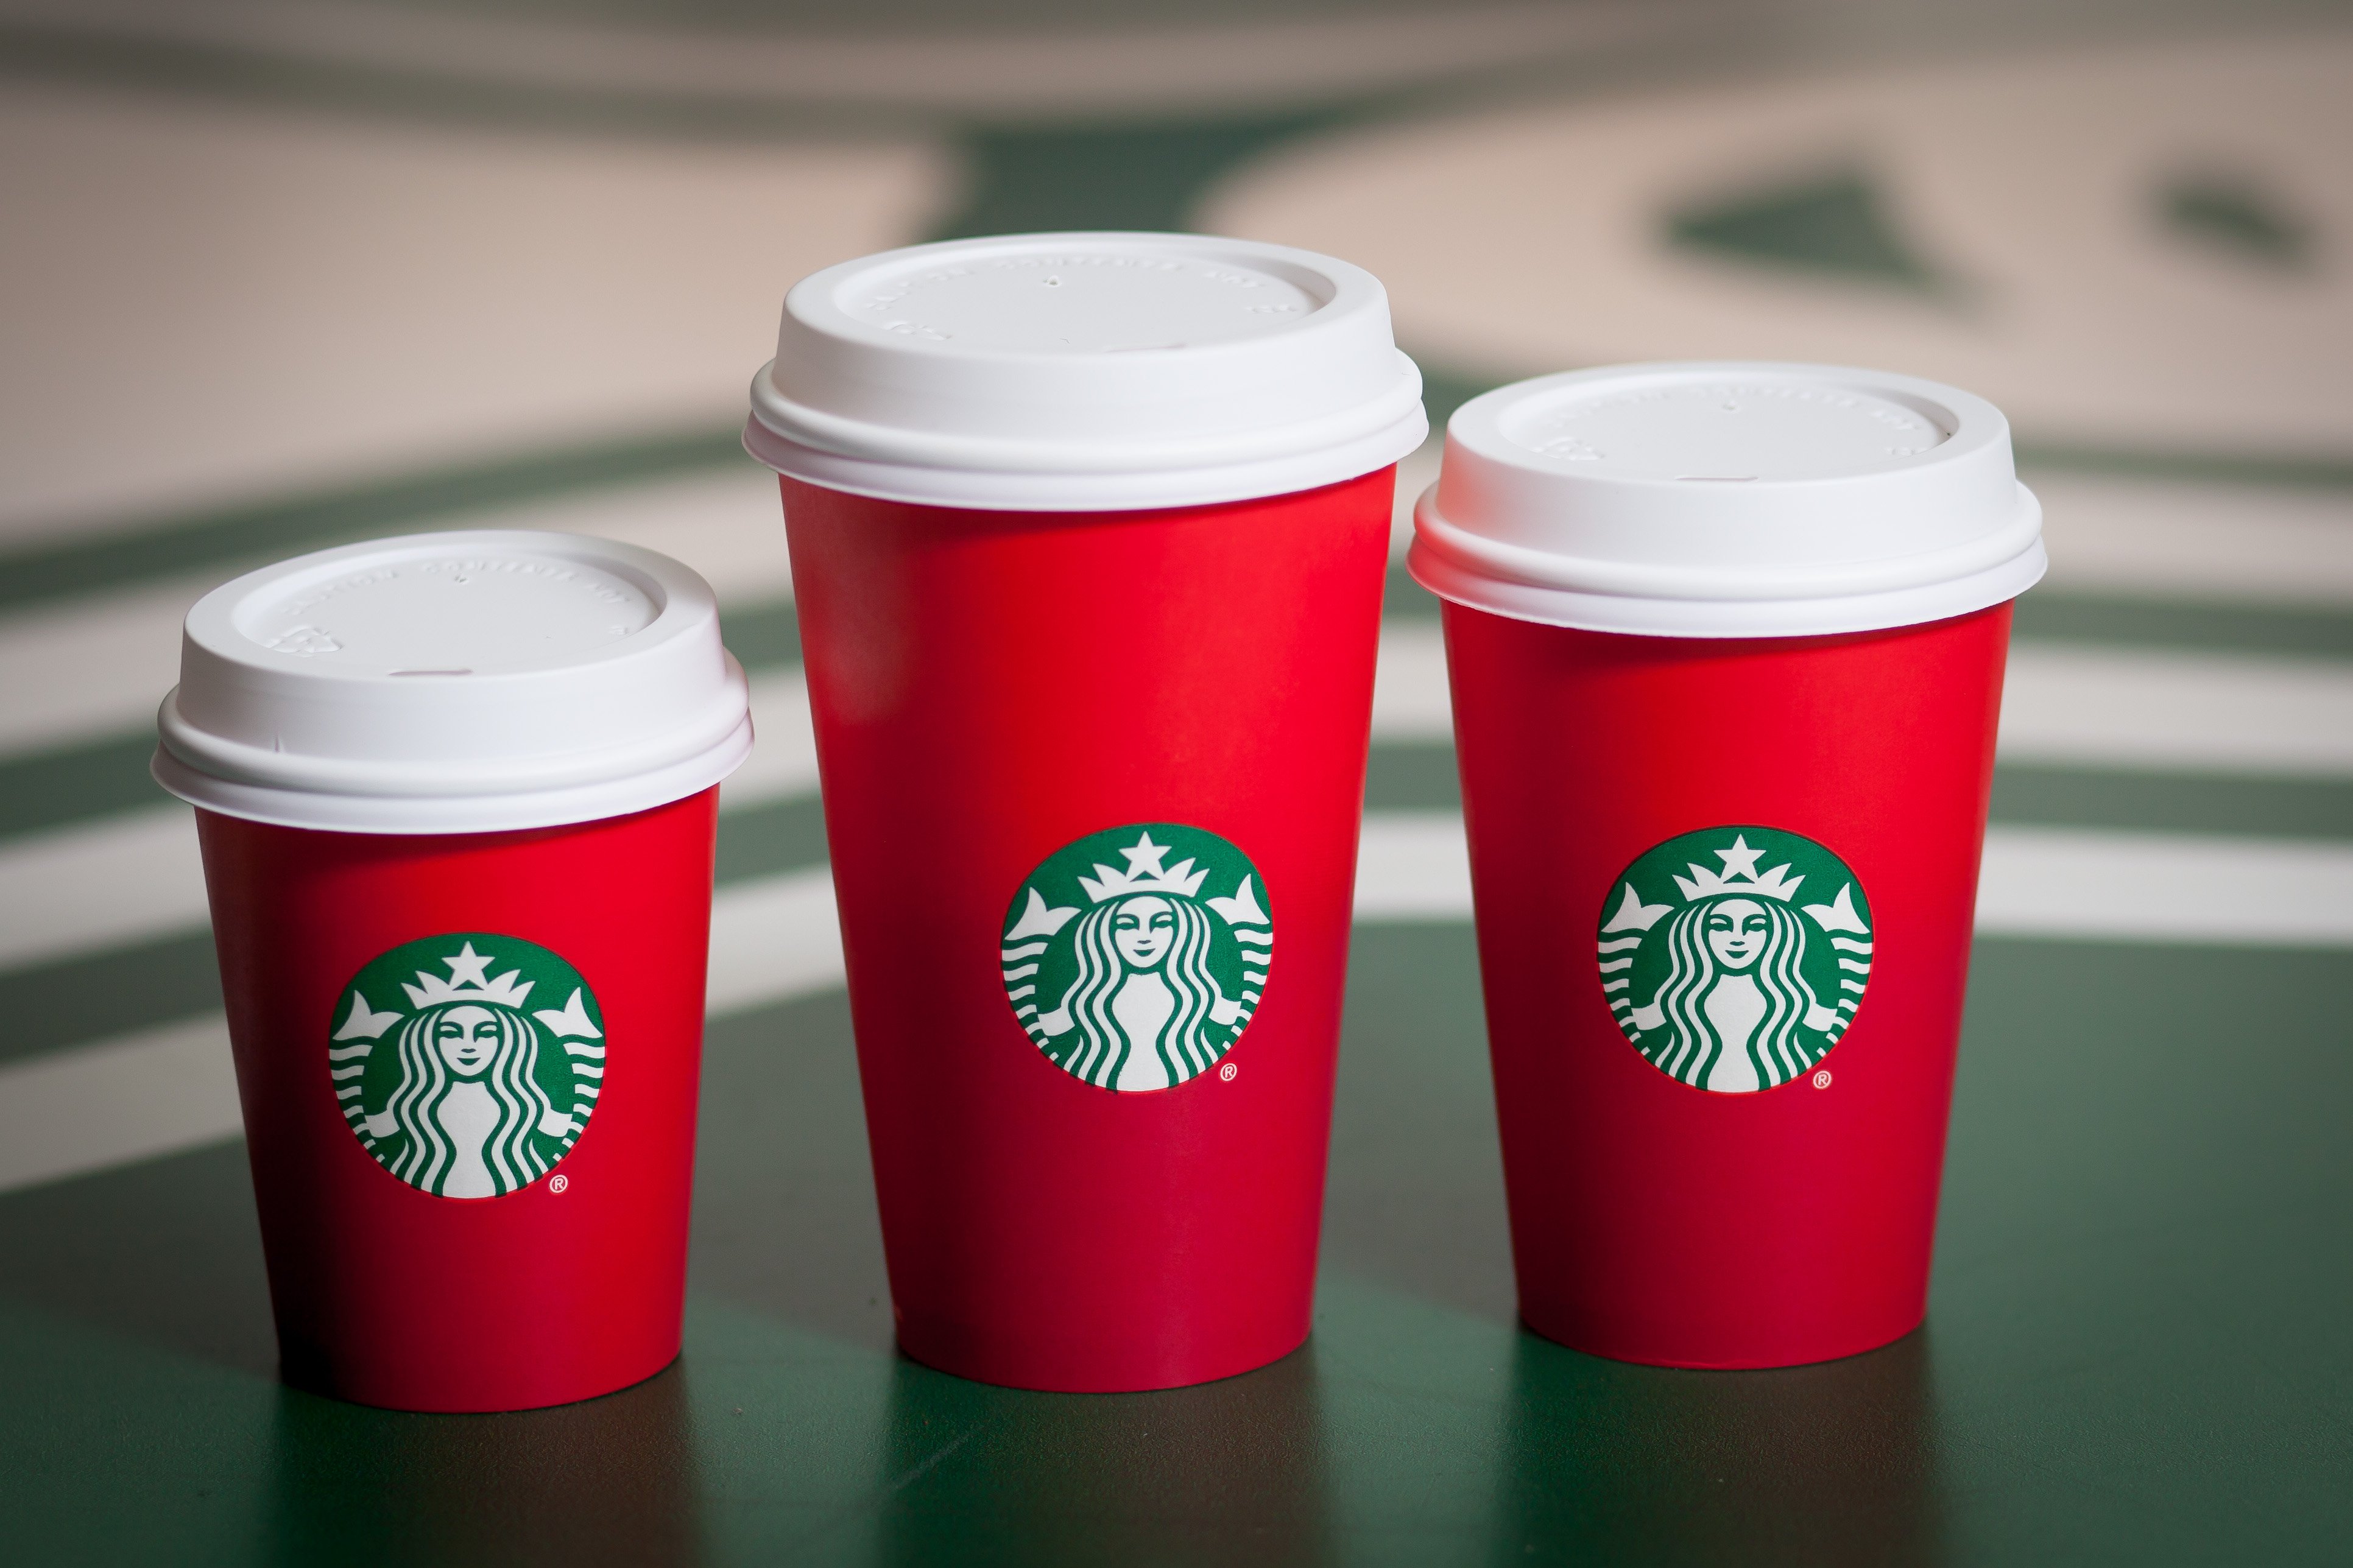 Why Some Christians Are Upset at Starbucks' New Holiday Cups | Time